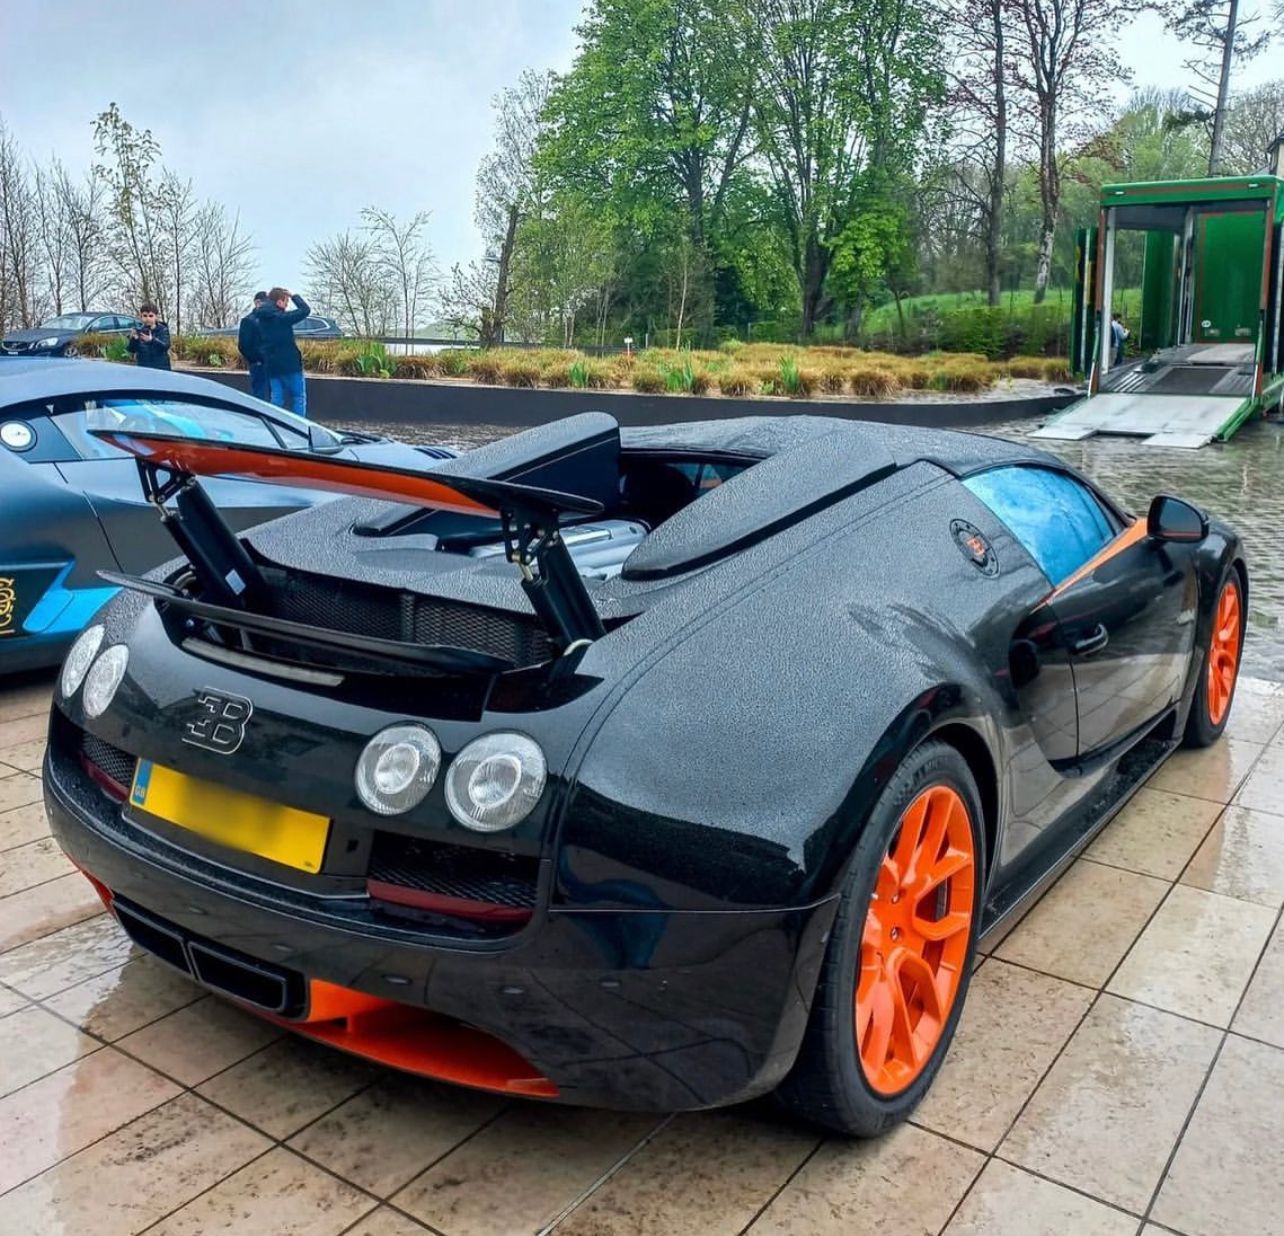 Car with black and orange